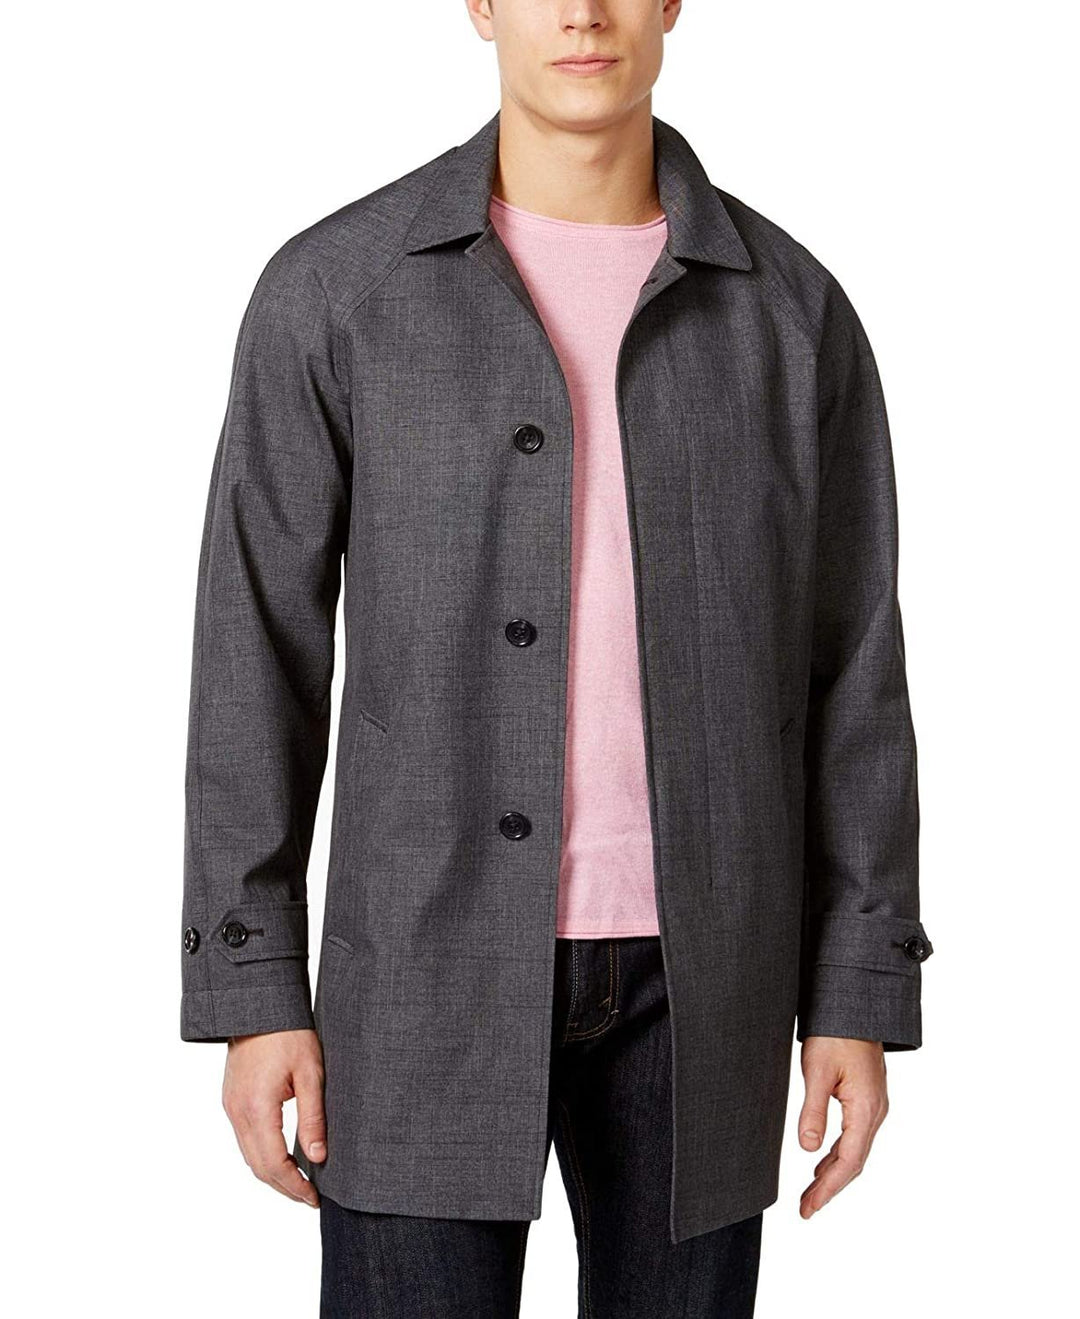 Michael Kors Men’s Single-Breasted 3 in 1 Jacket with Removable Vest All Year Round Raincoat